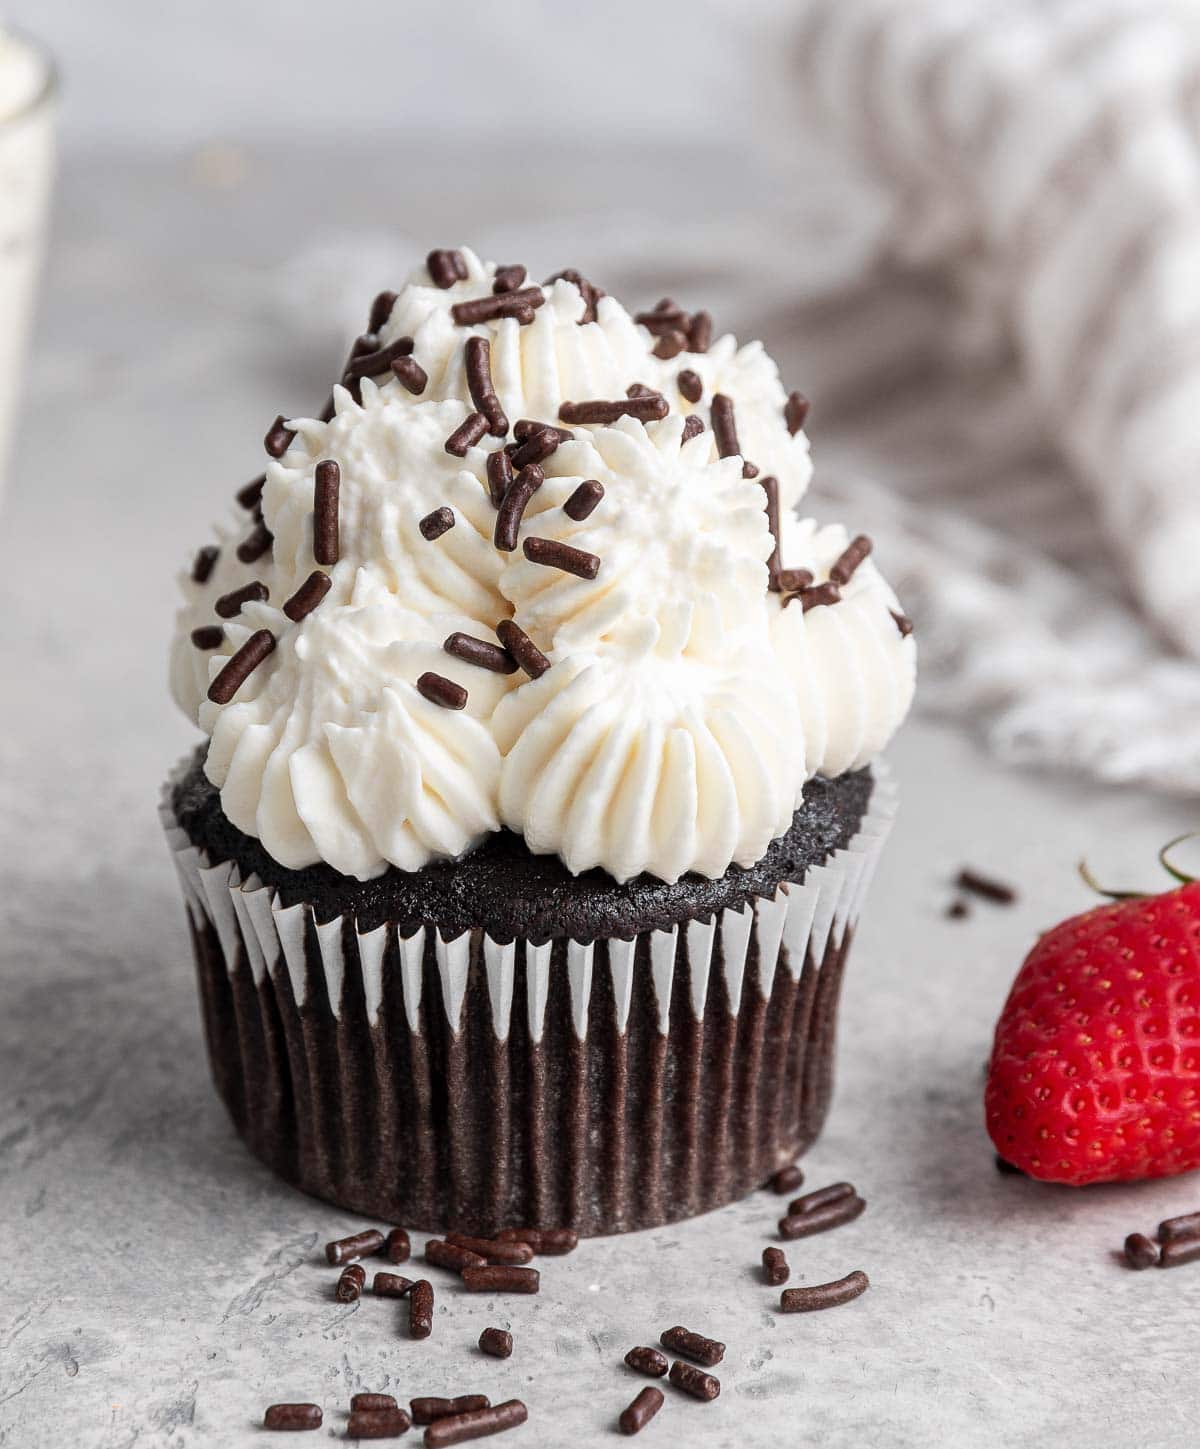 Whipped Cream Cream Cheese Frosting: Perfect for Cakes, Cupcakes, and More